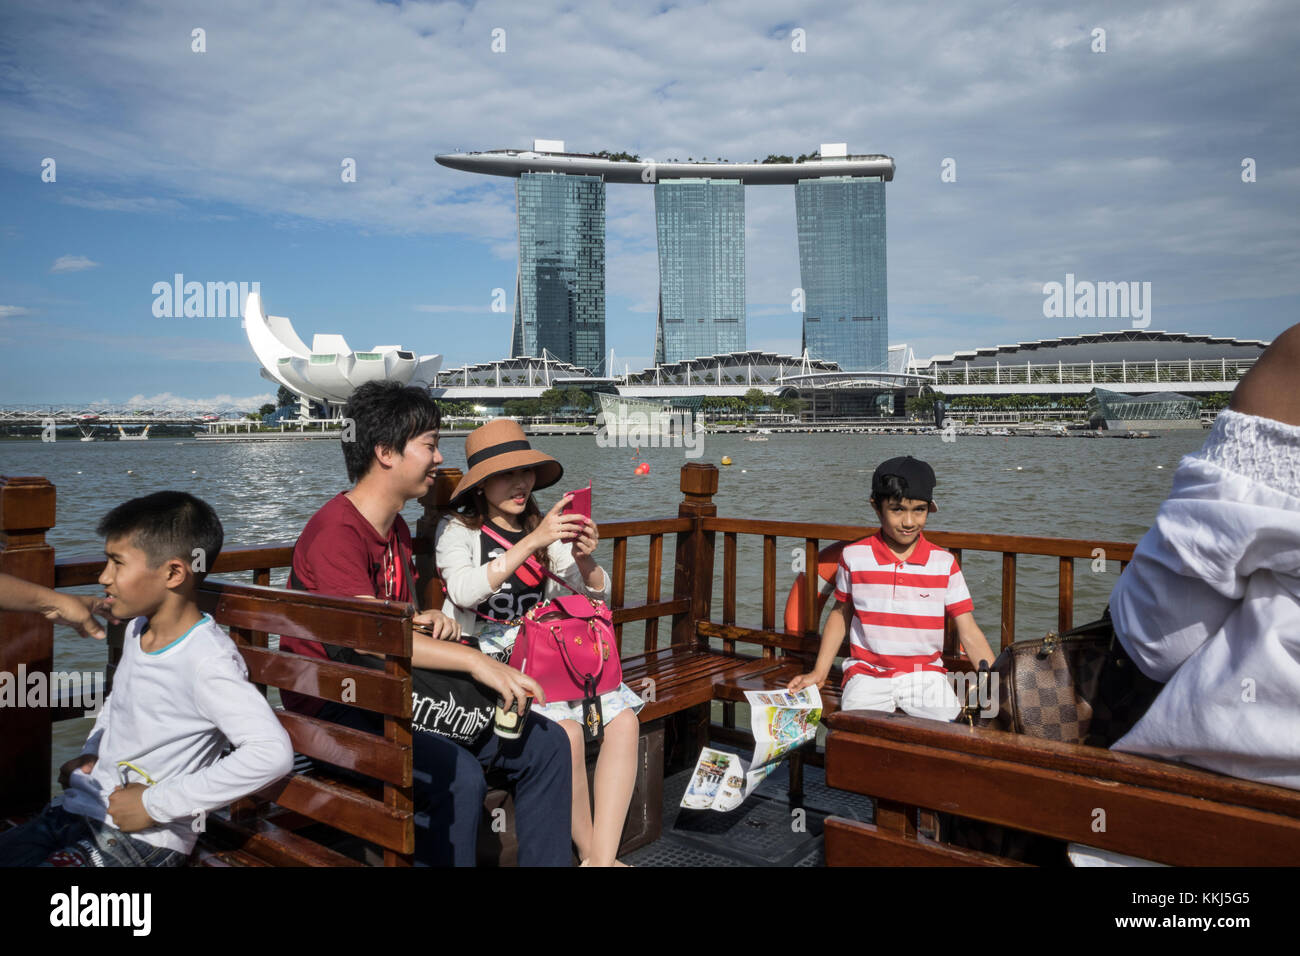 Marina Bay Sands Hotel in Singapore, with a tourist boat full of tourists in the foreground Stock Photo